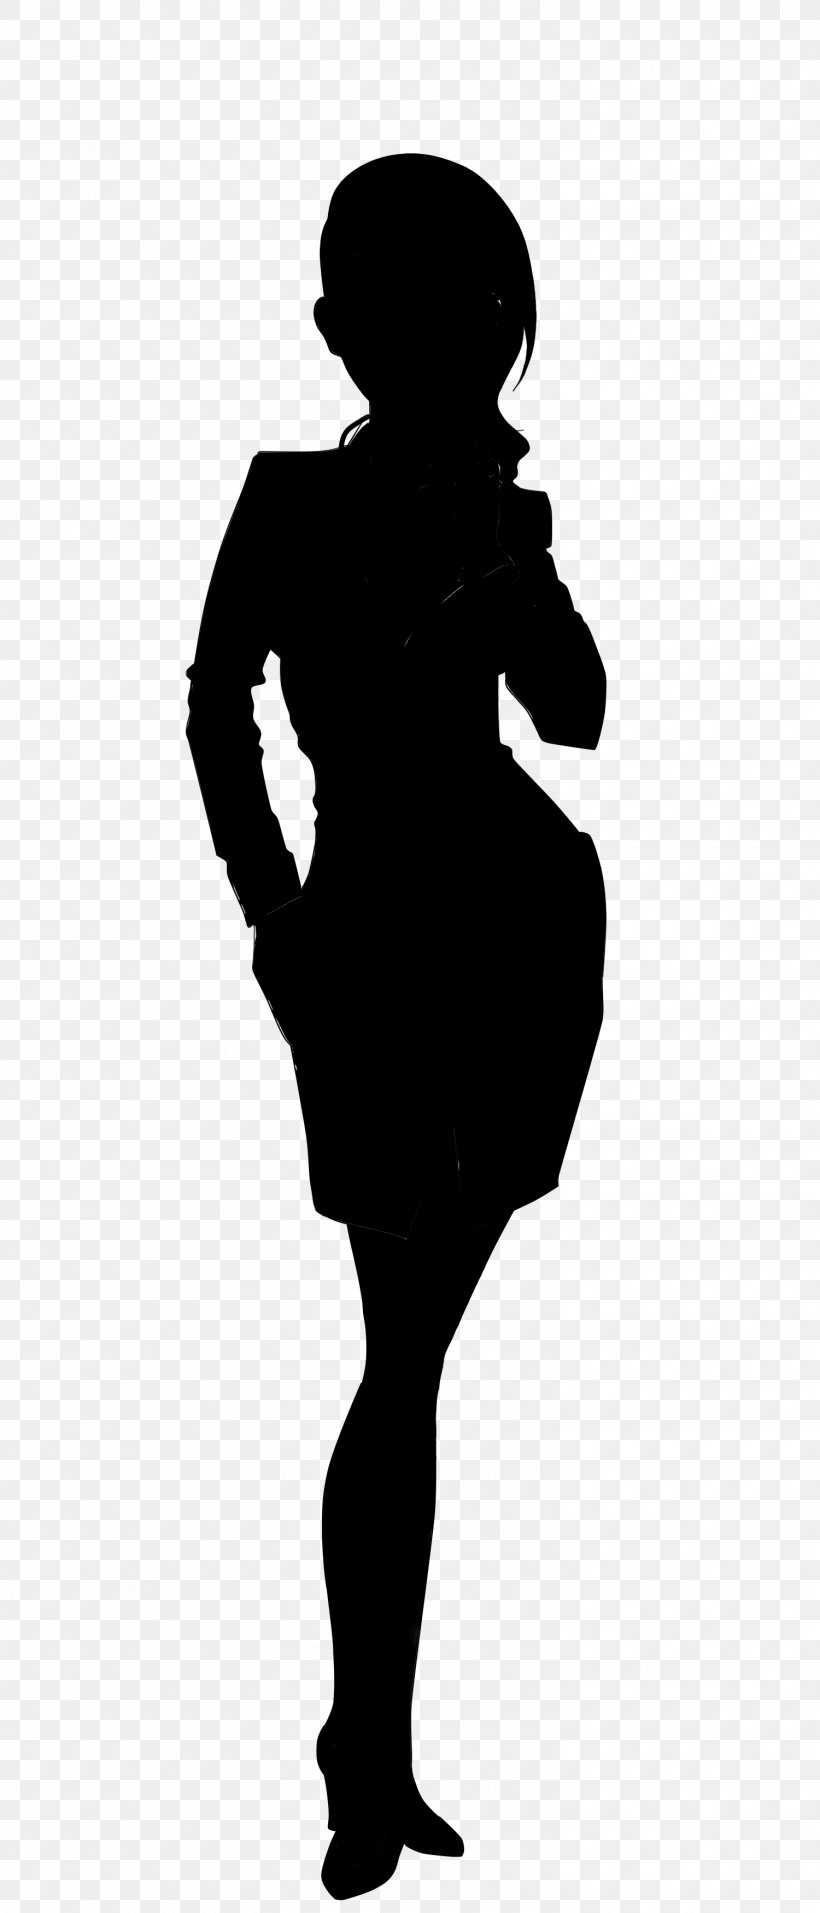 Silhouette Stock Photography Image Vector Graphics, PNG, 1500x3500px, Silhouette, Blackandwhite, Female, Little Black Dress, Photography Download Free